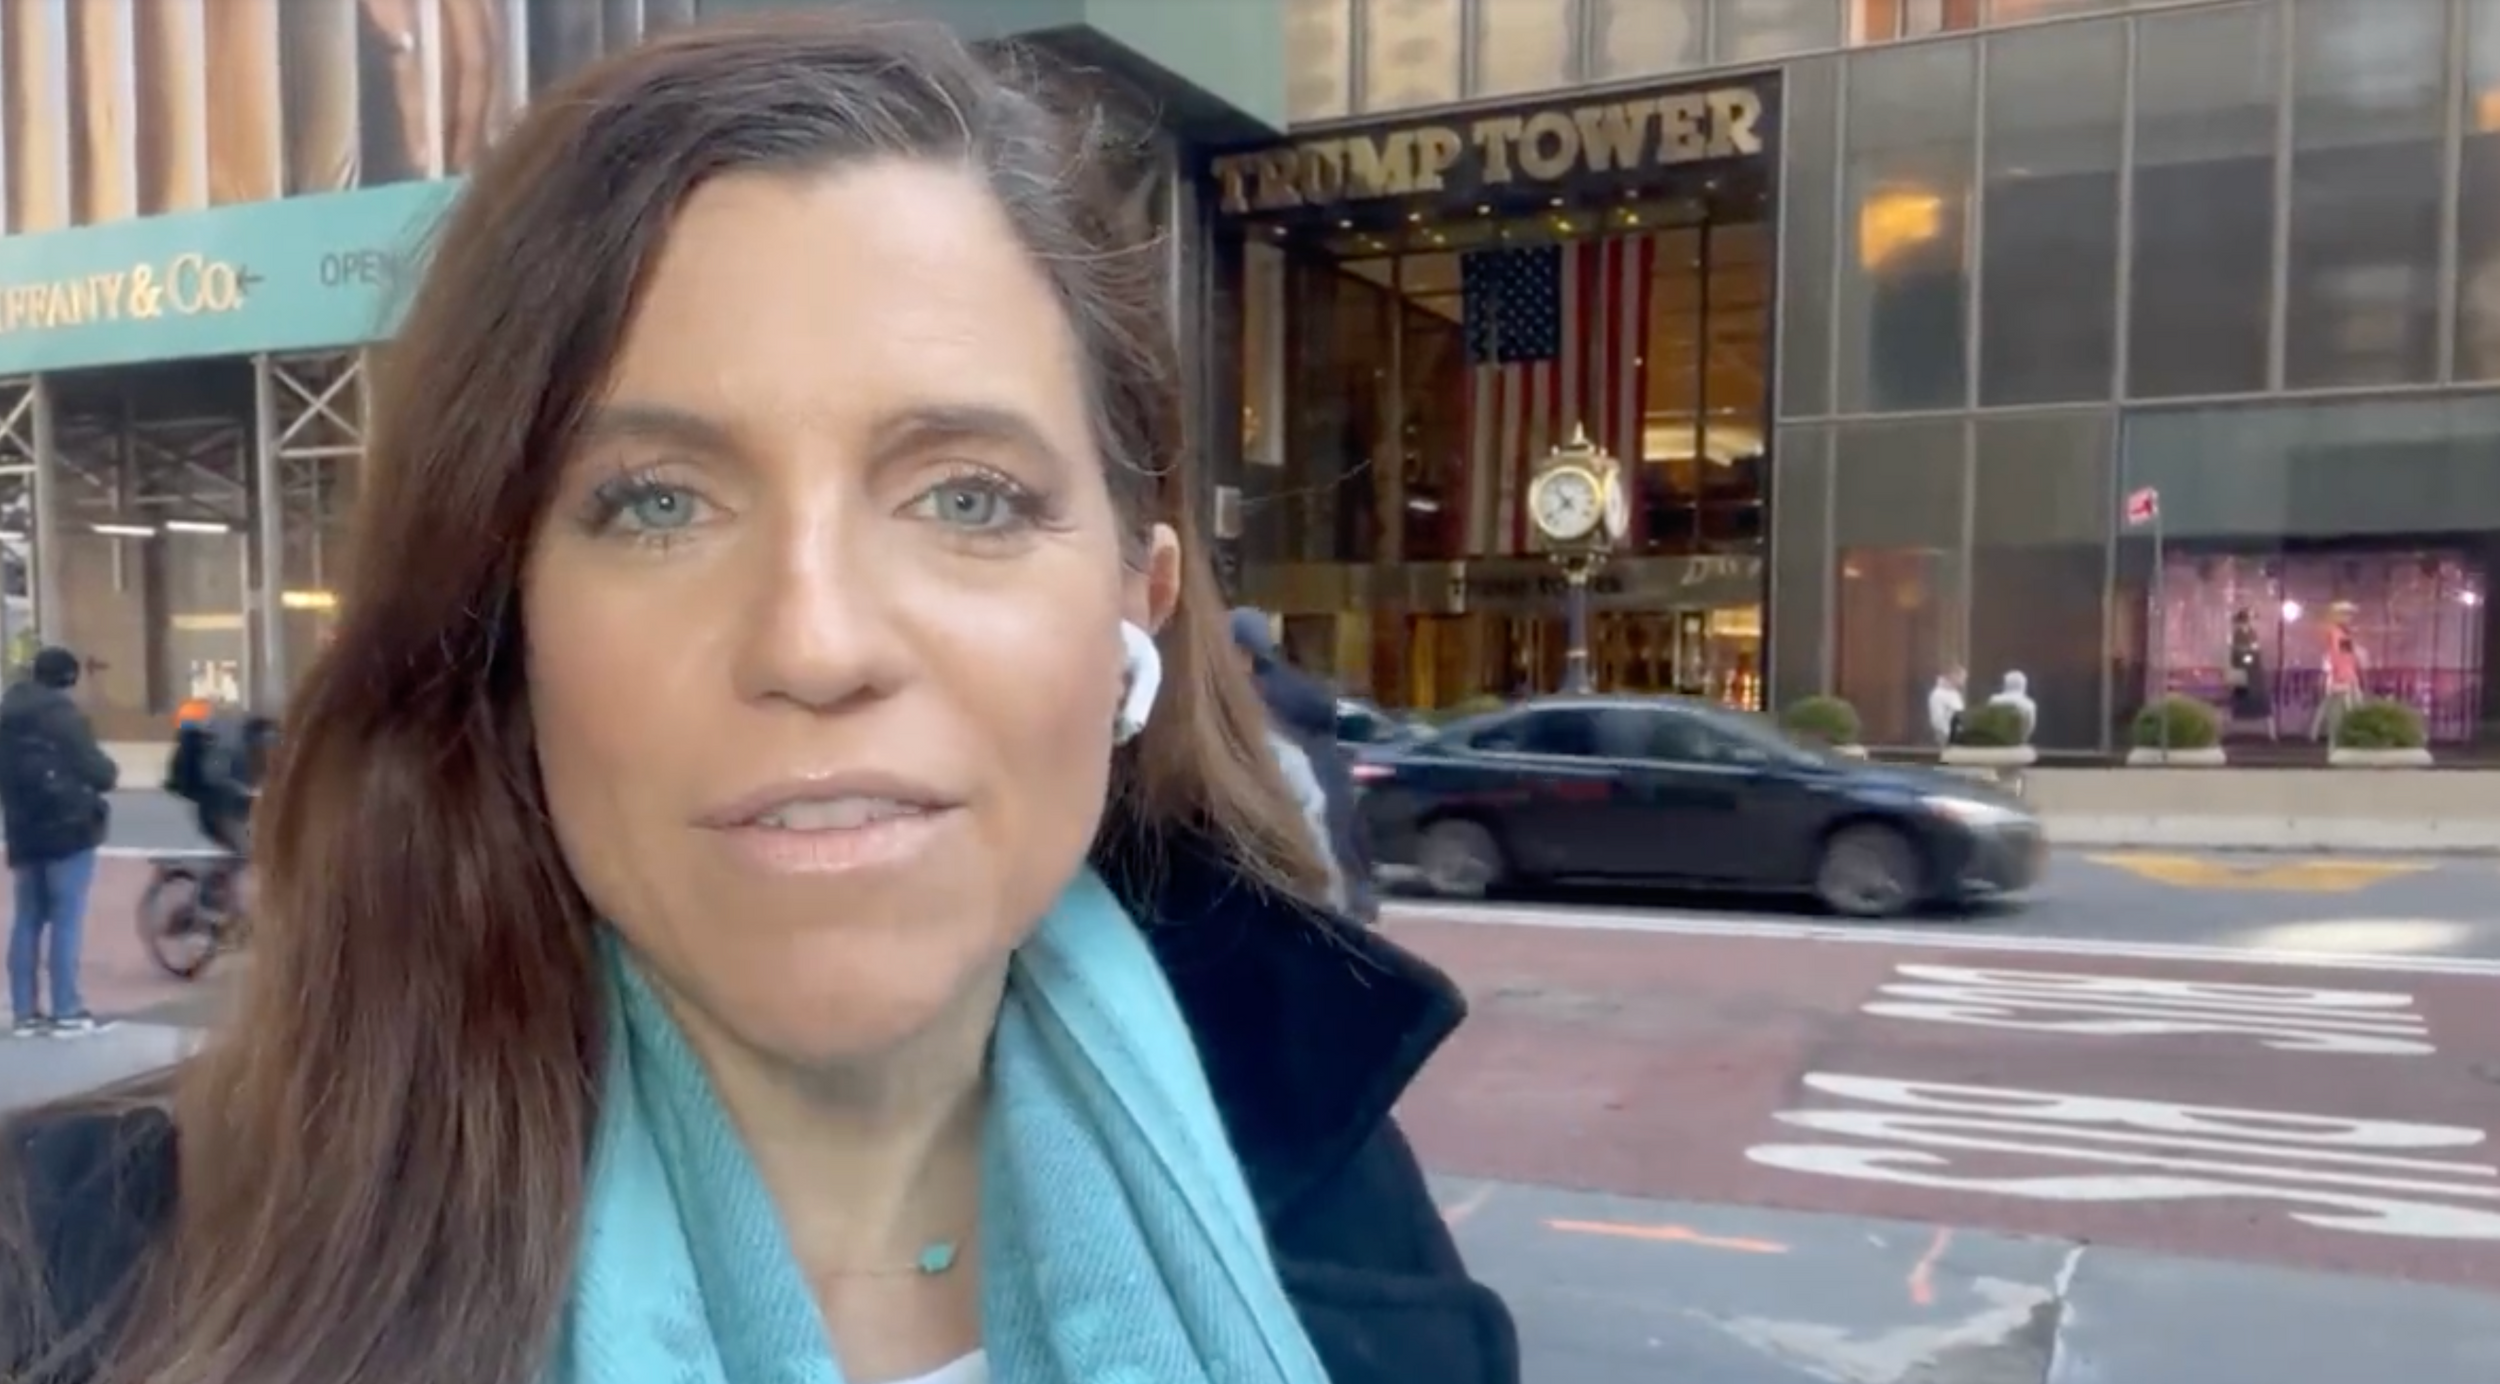 GOP Rep. Mocked for Desperate Video Outside Trump Tower After Trump Endorsed Her Opponent